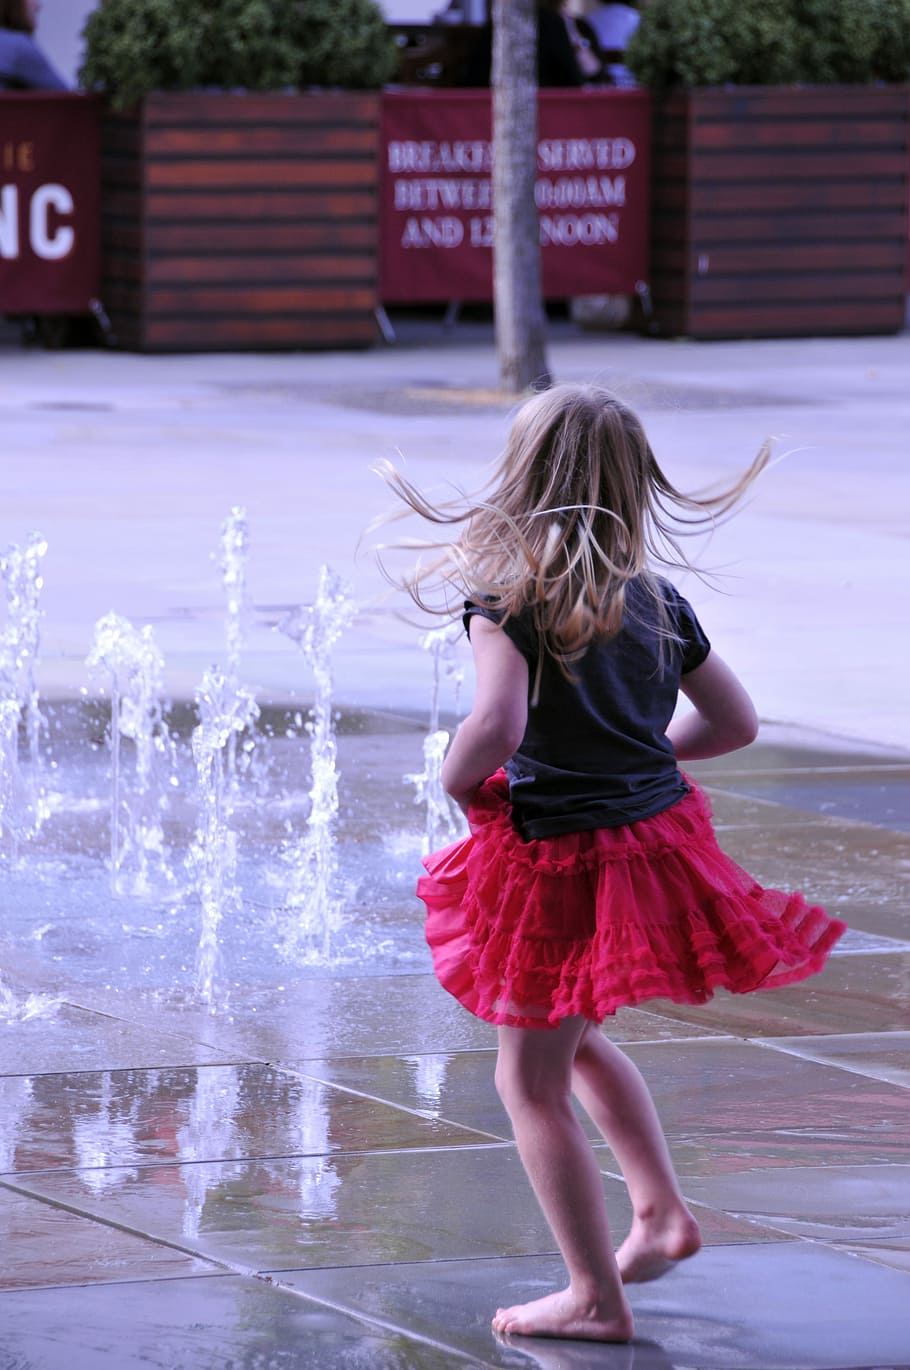 girl, playing, water fountain, little girl, dance, water jets, basin, fountain, children only, child